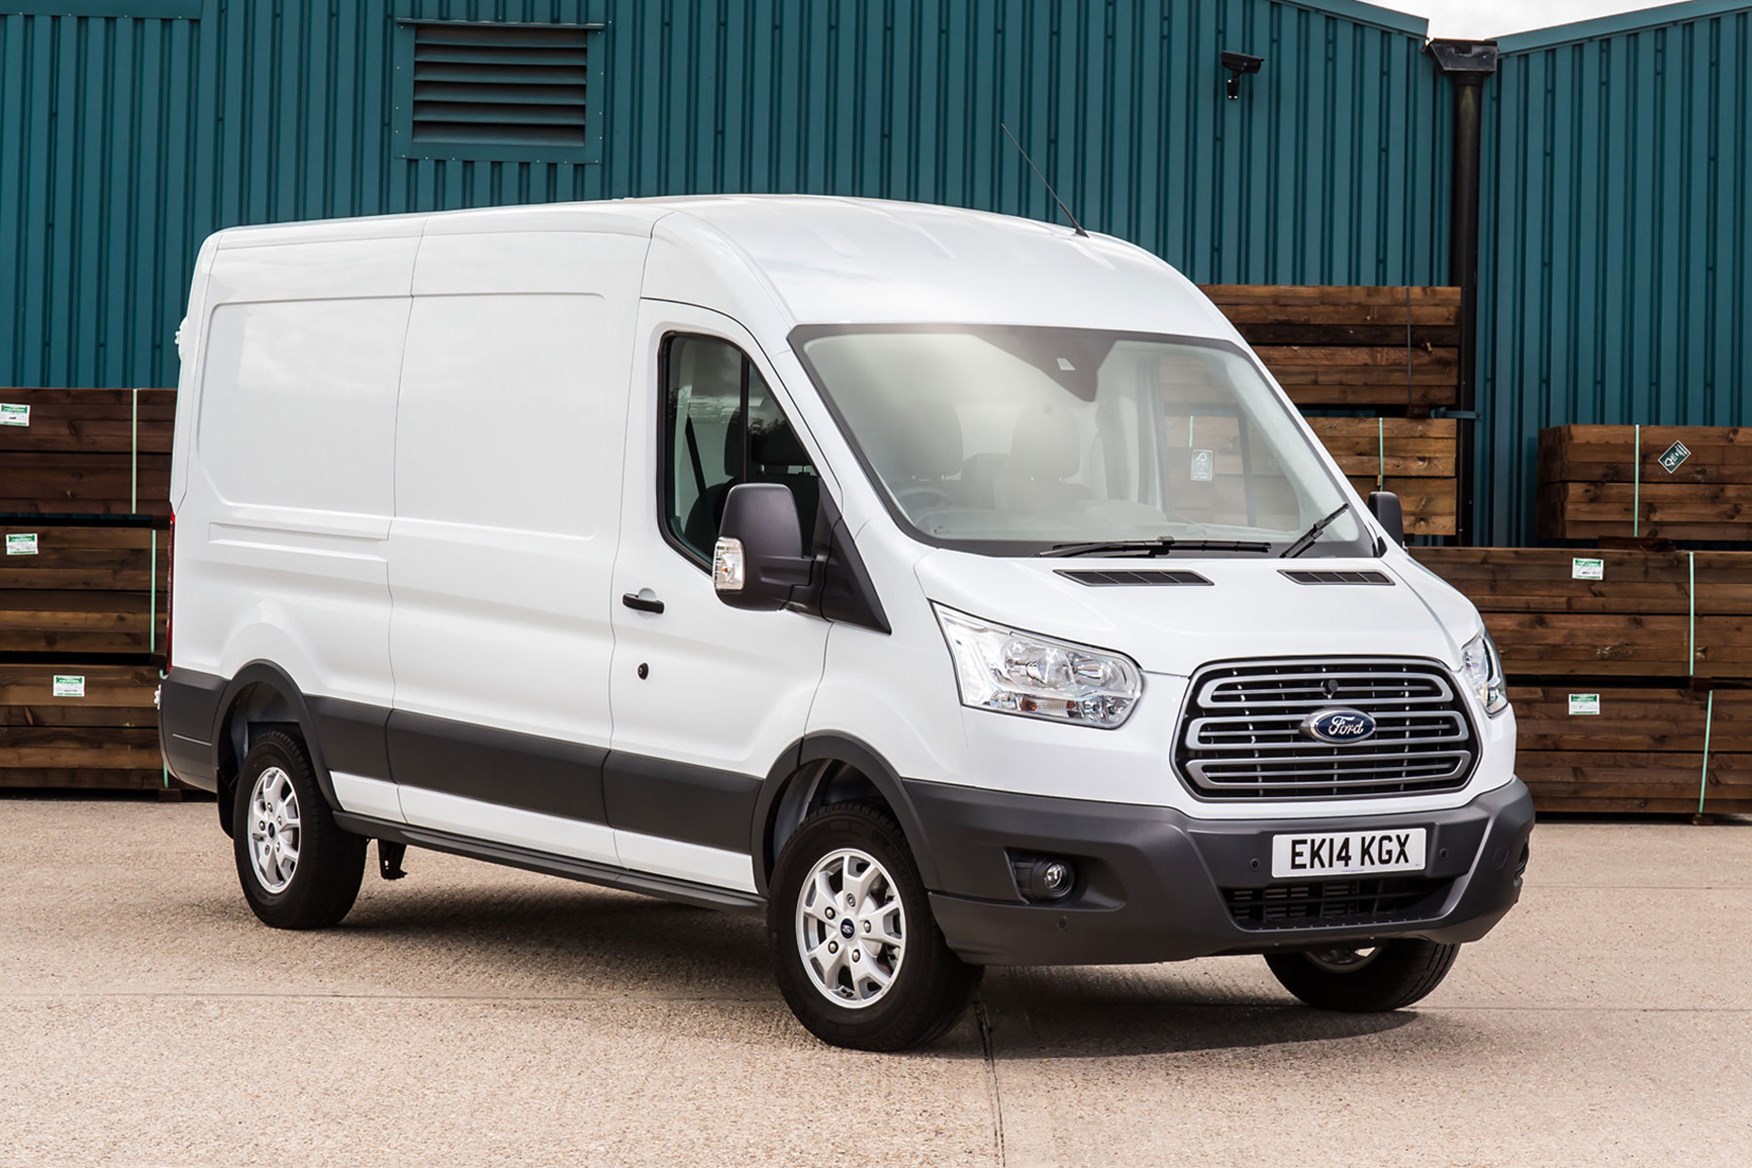 Ford Transit RWD Trend review on Parkers Vans